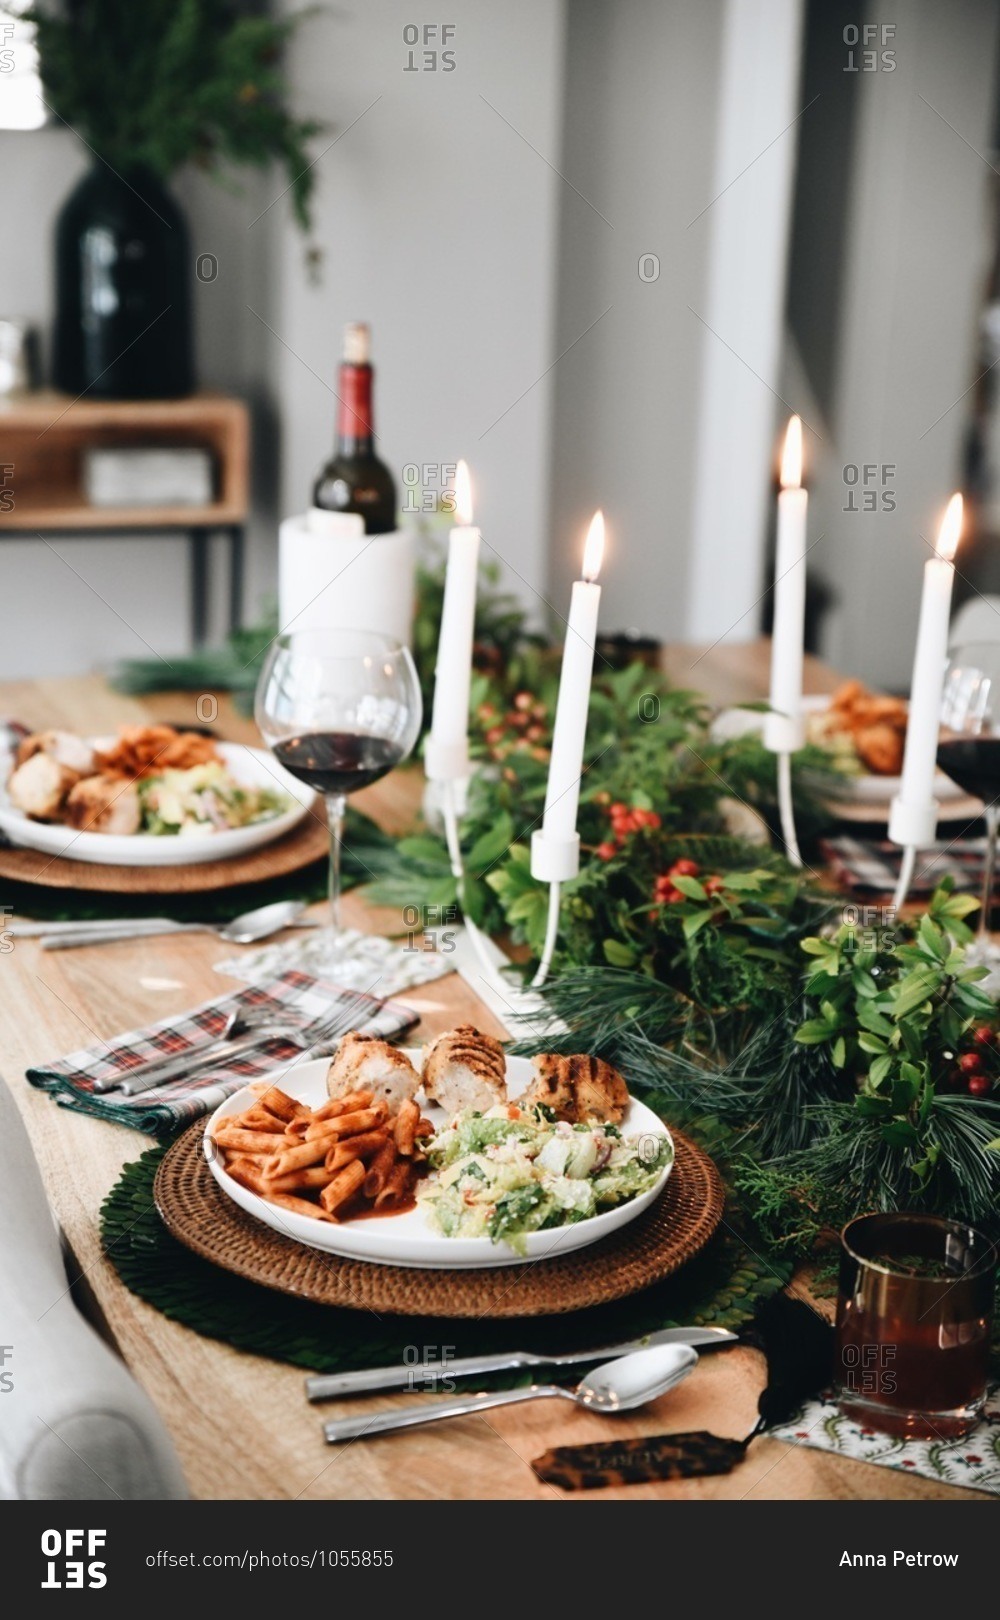 Food served on a dinner table set for a small holiday party with candles and wine